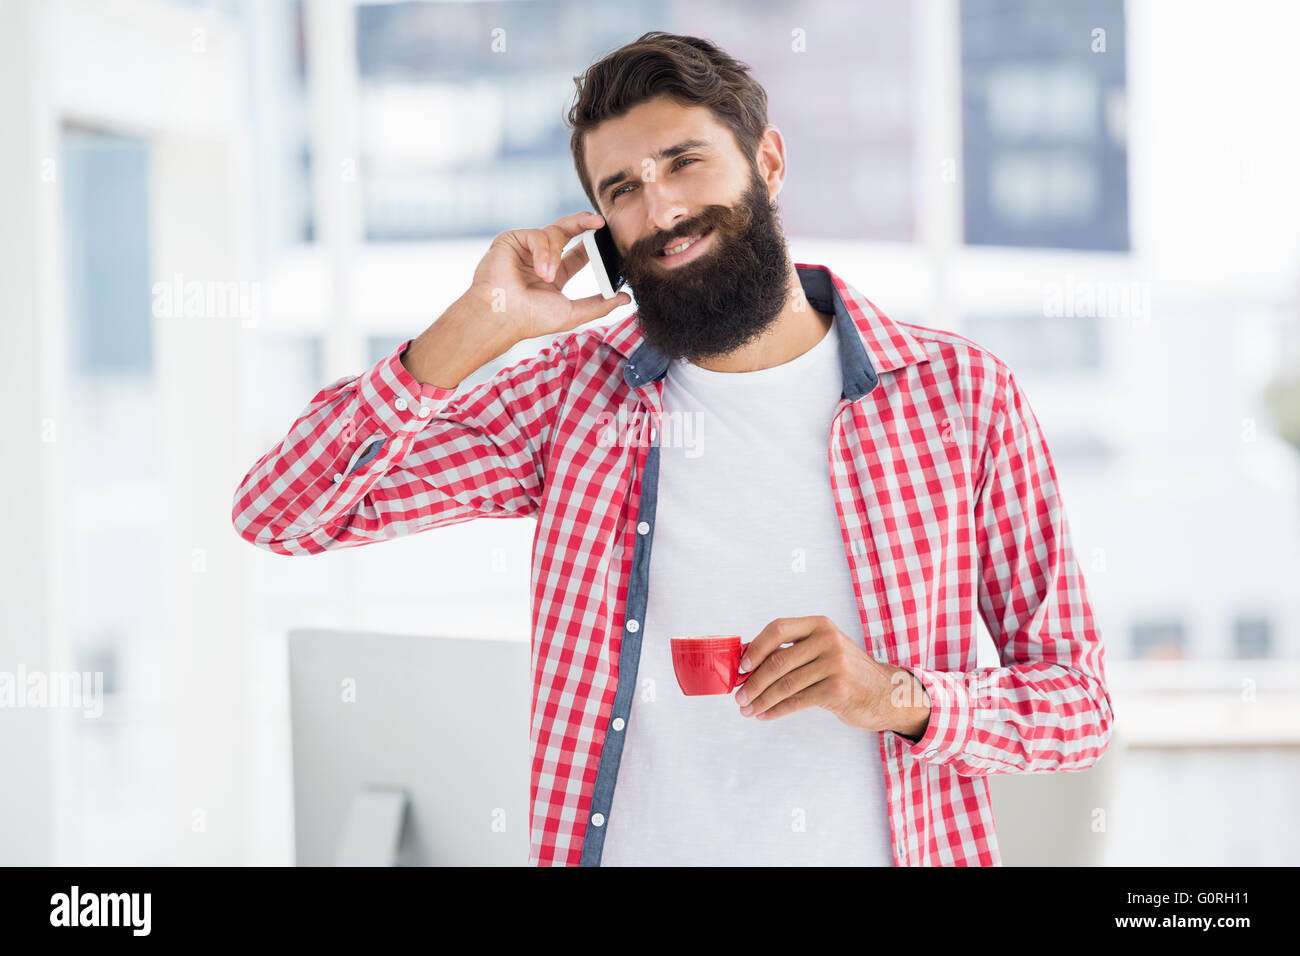 Hipster calling someone Stock Photo